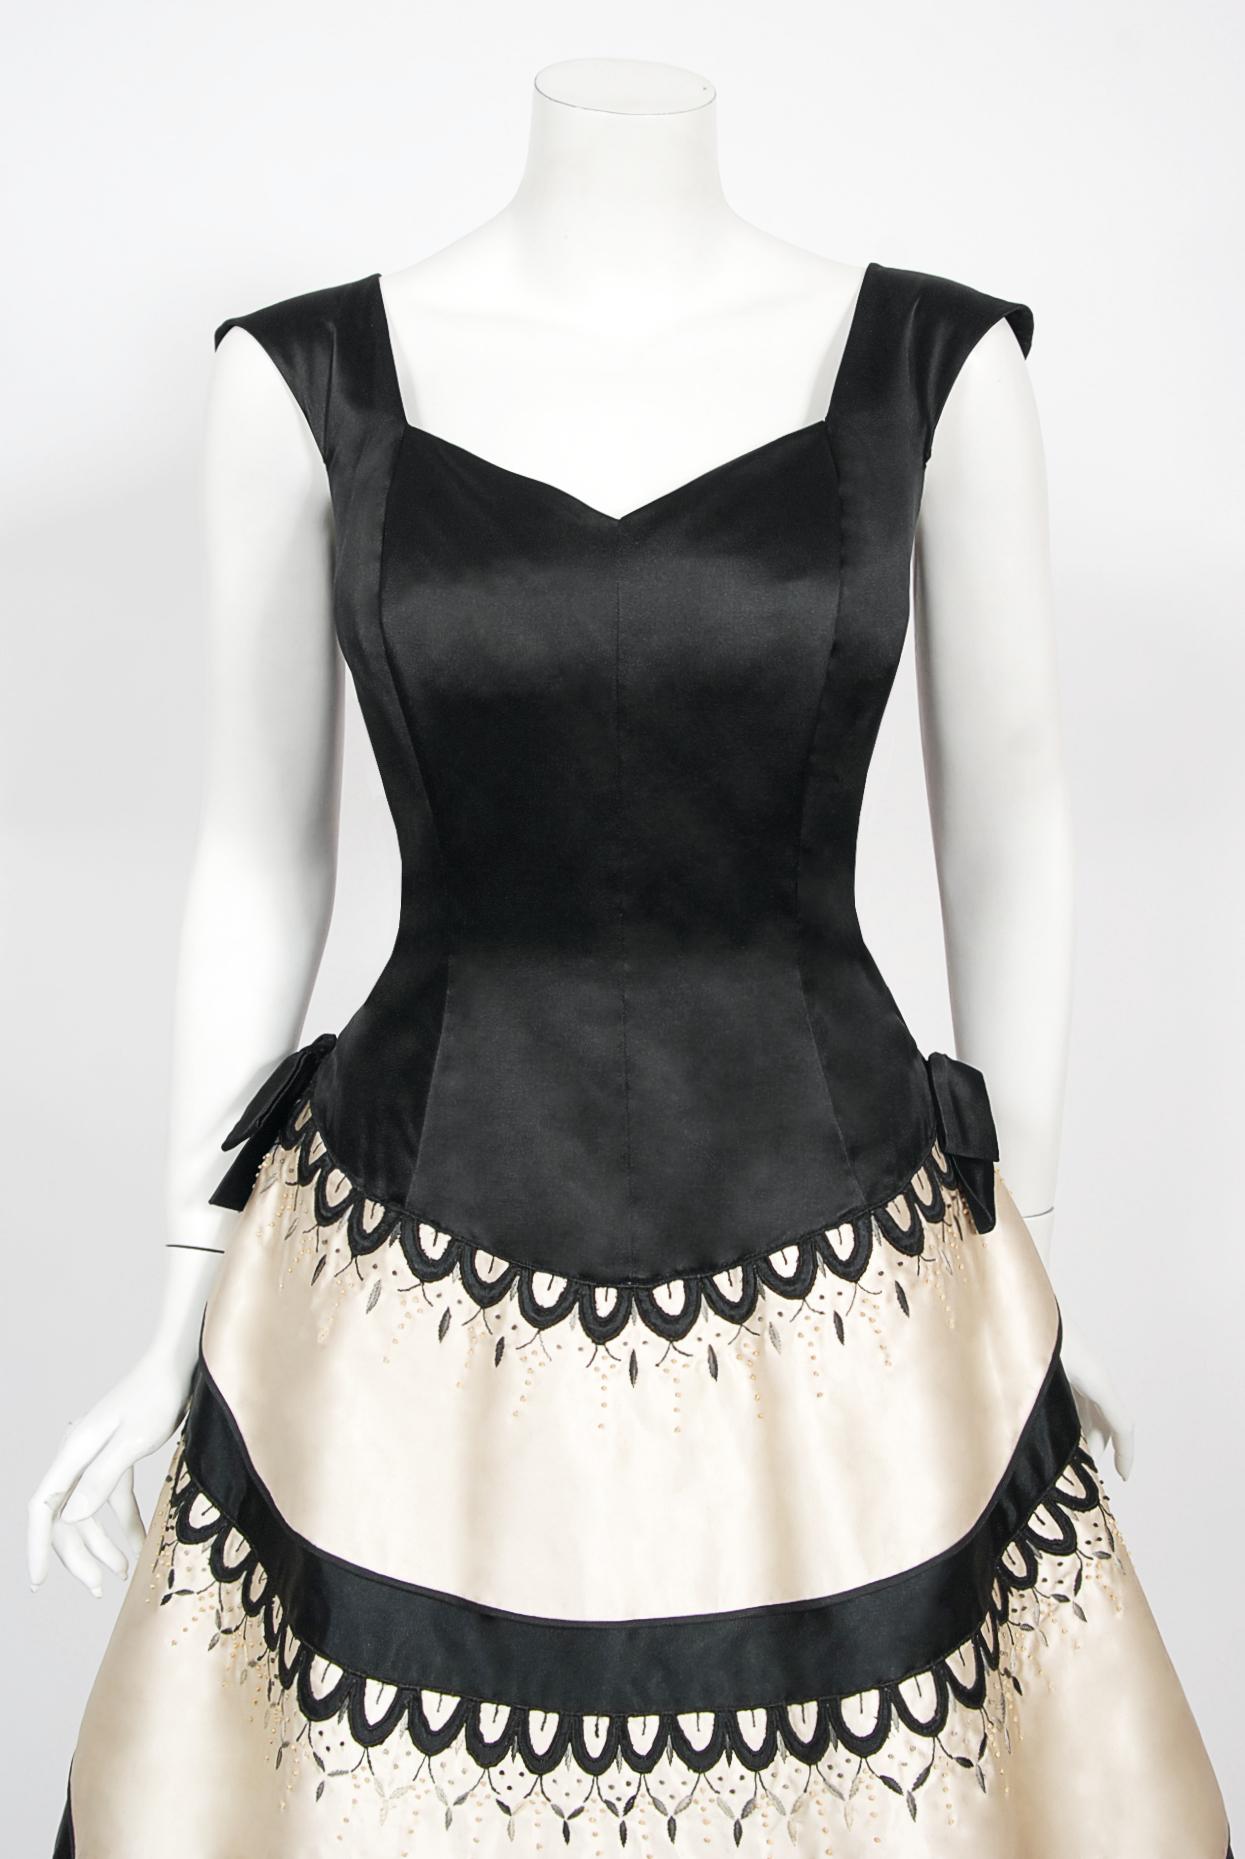 Women's Vintage 1950's Emilio Schuberth Couture Black & Ivory Embroidered Satin Dress For Sale